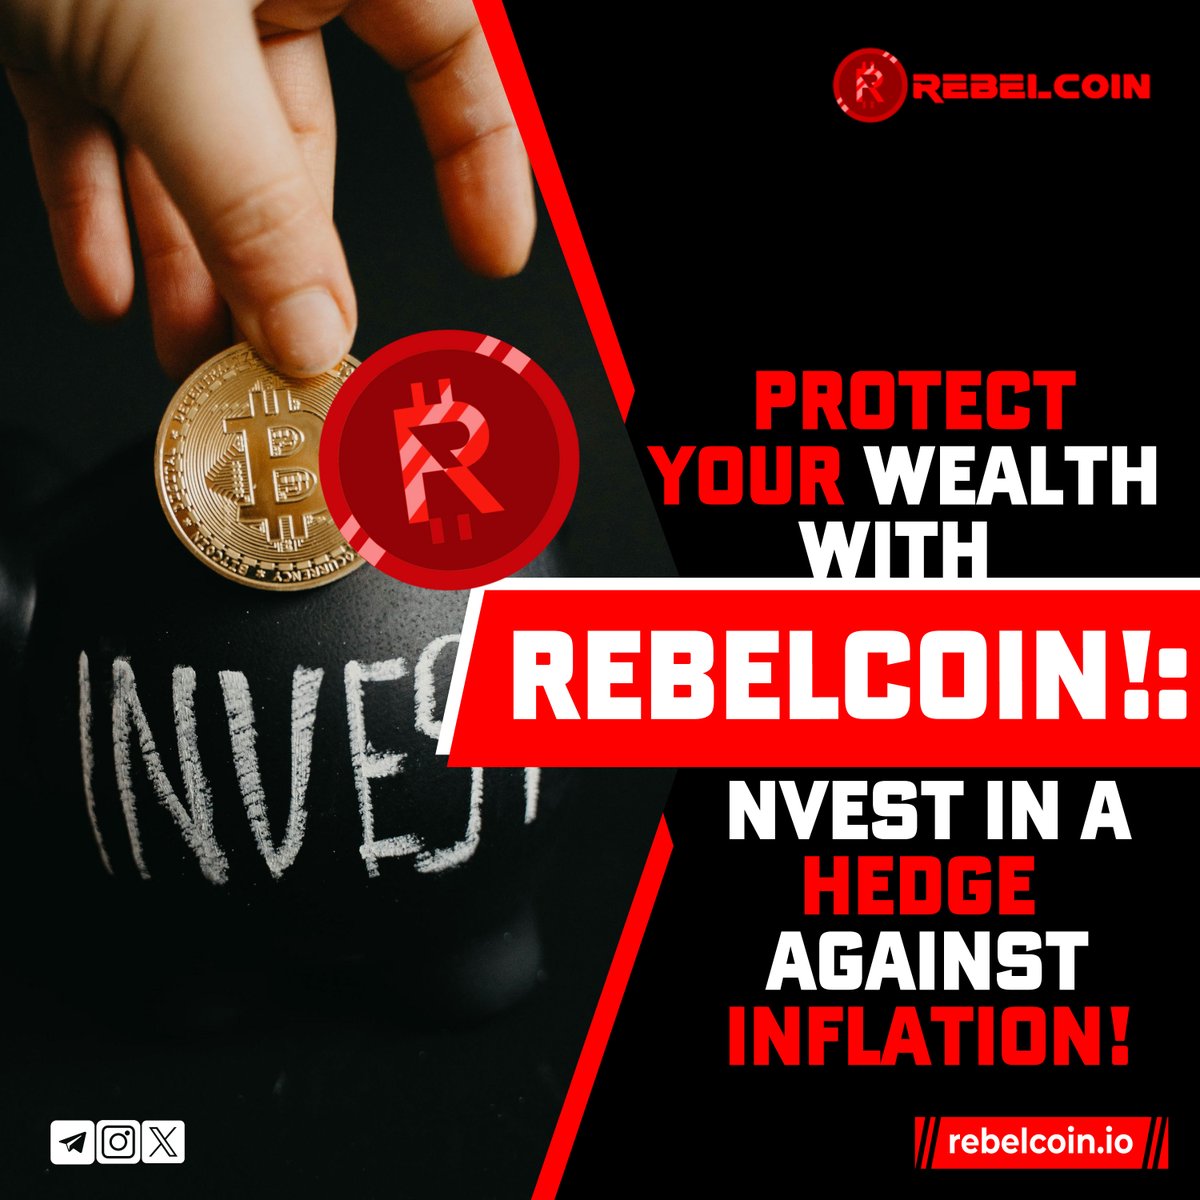 Time to invest in the future! ✨ RebelCoin: Innovative, growing crypto. ✨ Secure, fast transactions. Limited supply, halving every 6 months. Invest in your future! 🌟
.
Get it now👉 xeggex.com/market/RBL_USDT
.
#CryptoAnalysis #CryptoPrice #CryptoExperts #CryptoPredictions